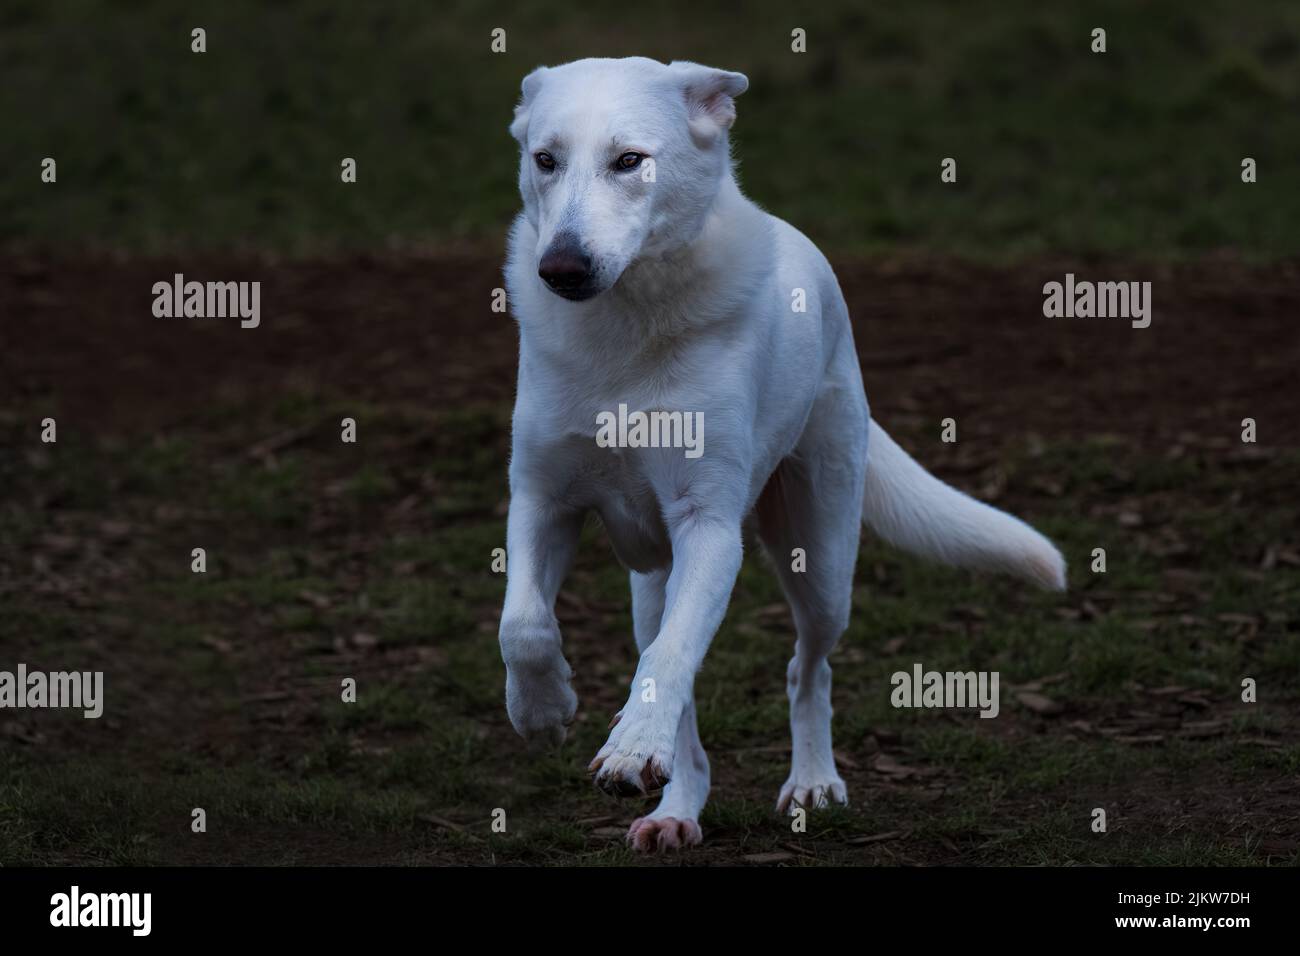 A WHITE SHEPARD DOG RUNNING AROSS A GRASS AND WOOD CHIP ARE WITH ITS FRONT PAWS OFF THE GROUND AND DISTNICT EYES AND A BLURRY BACKGROUND Stock Photo